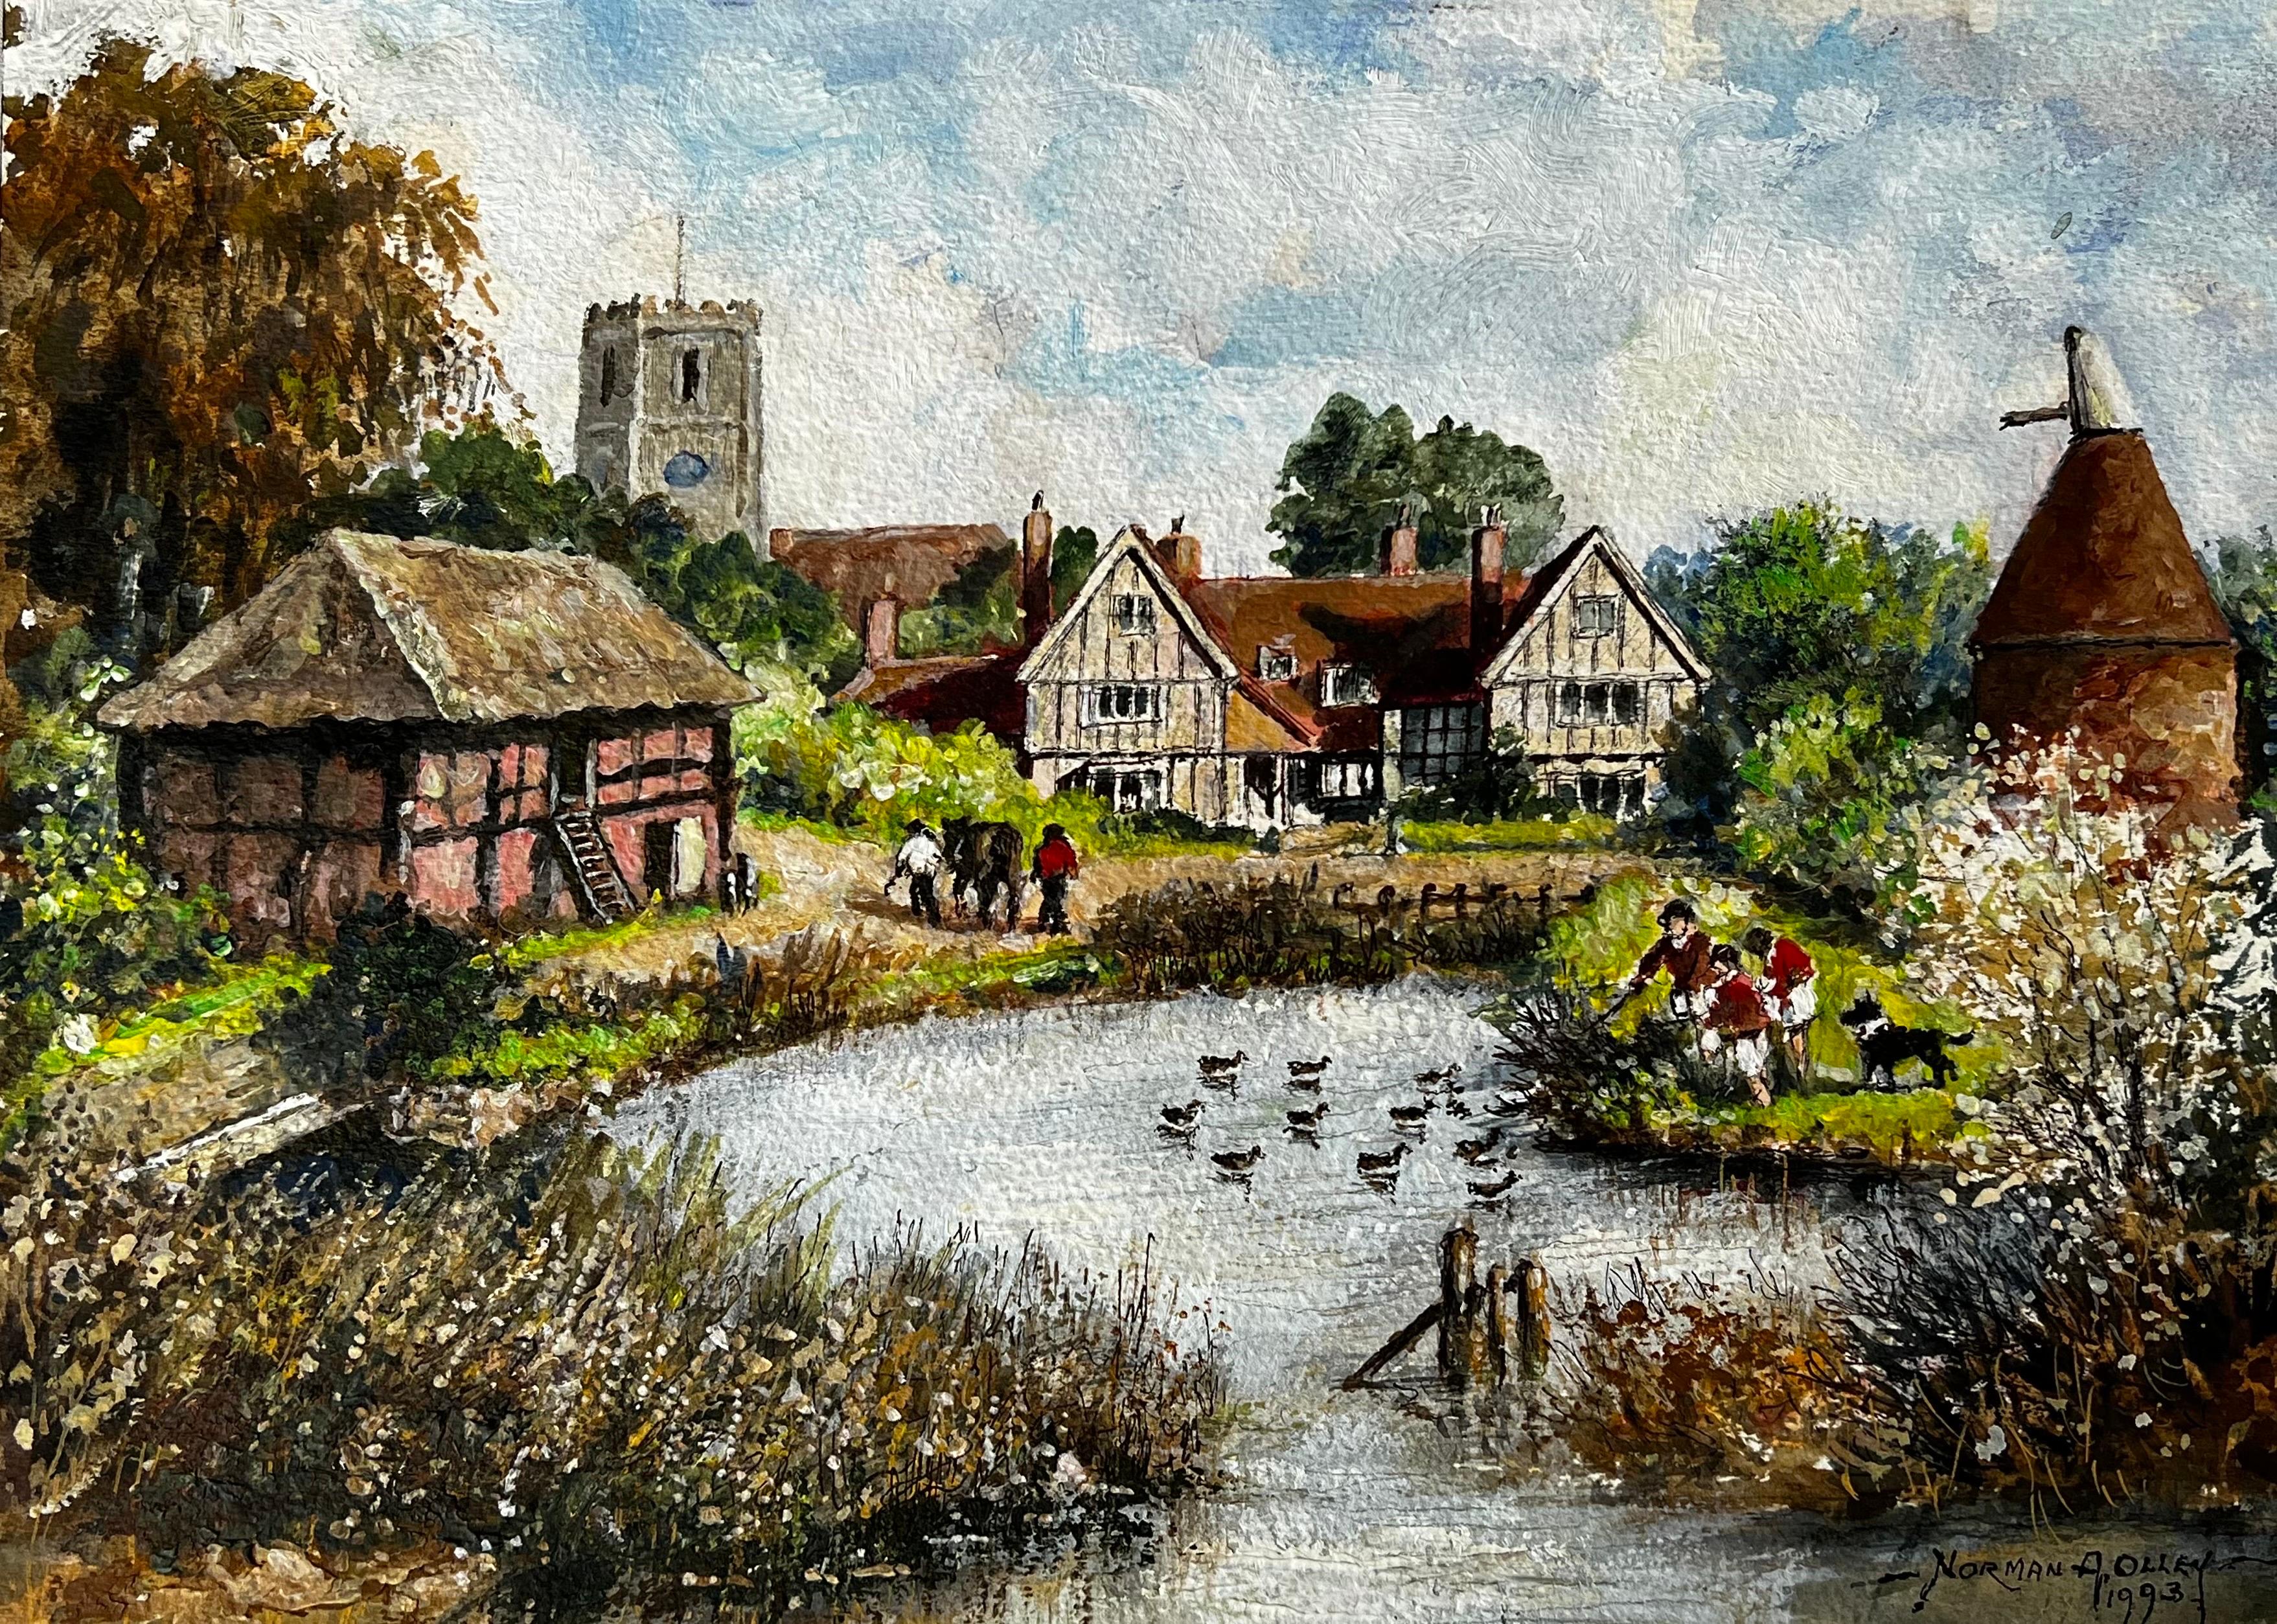 The Huntsman Feeding The Ducks In A Peaceful Kentish Town Landscape - Painting by Norman A Olley